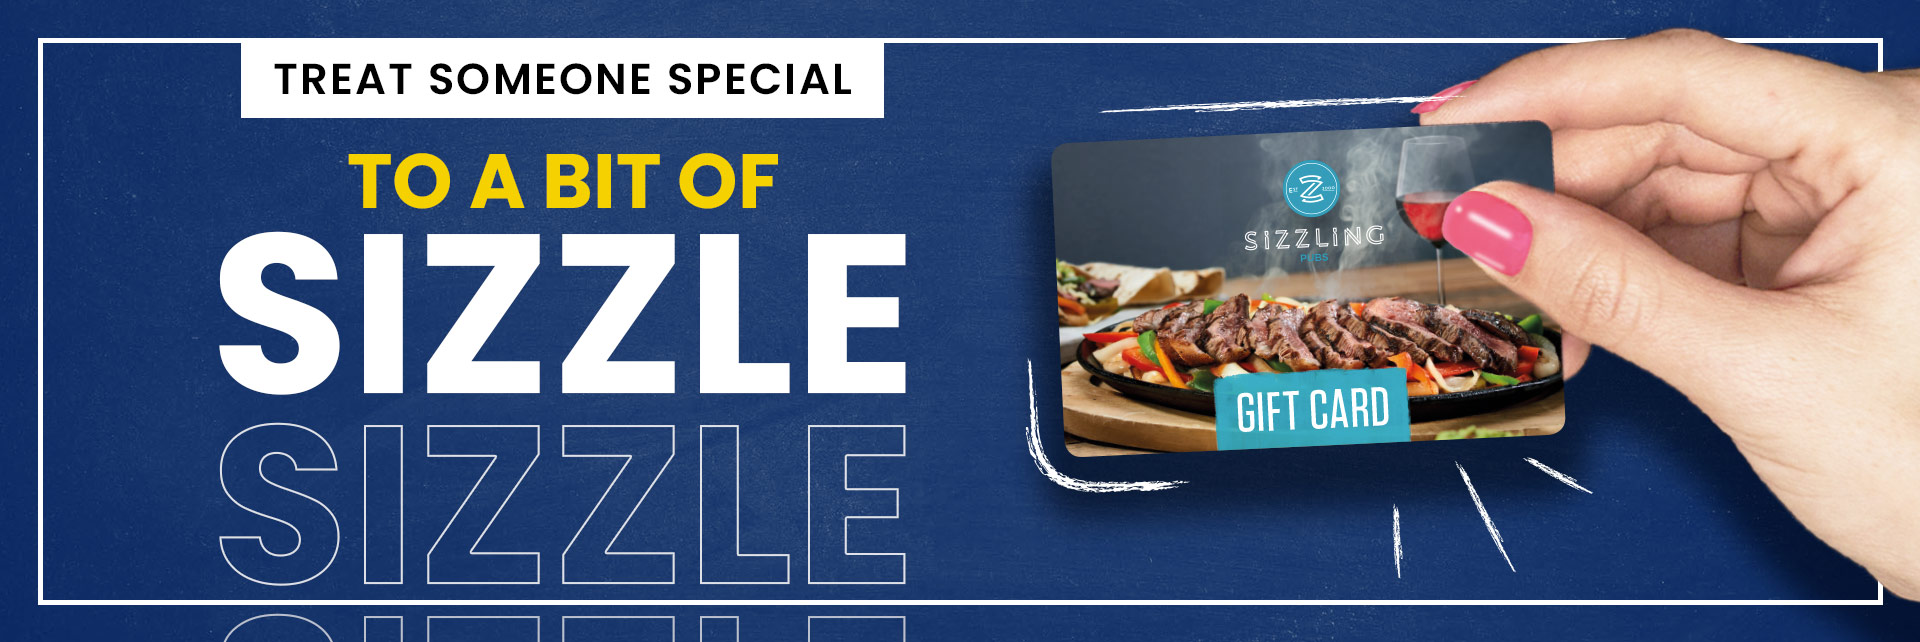 Sizzling Pubs Gift Card at The Highfield, Chesterfield in Chesterfield